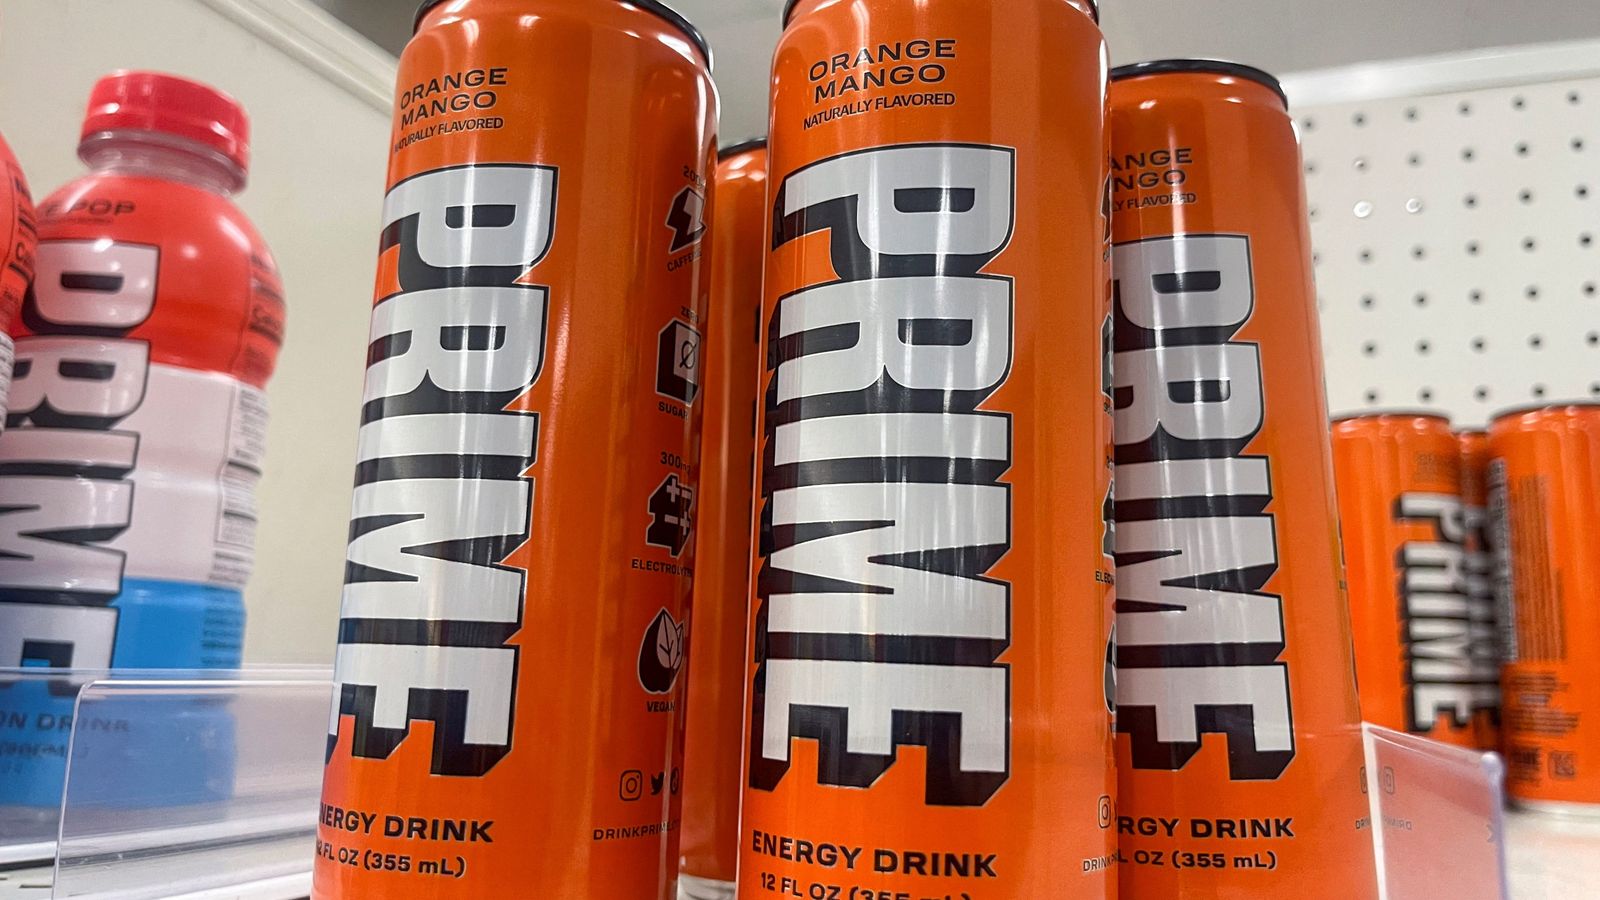 Labour considering ban on sale of energy drinks to under-16s